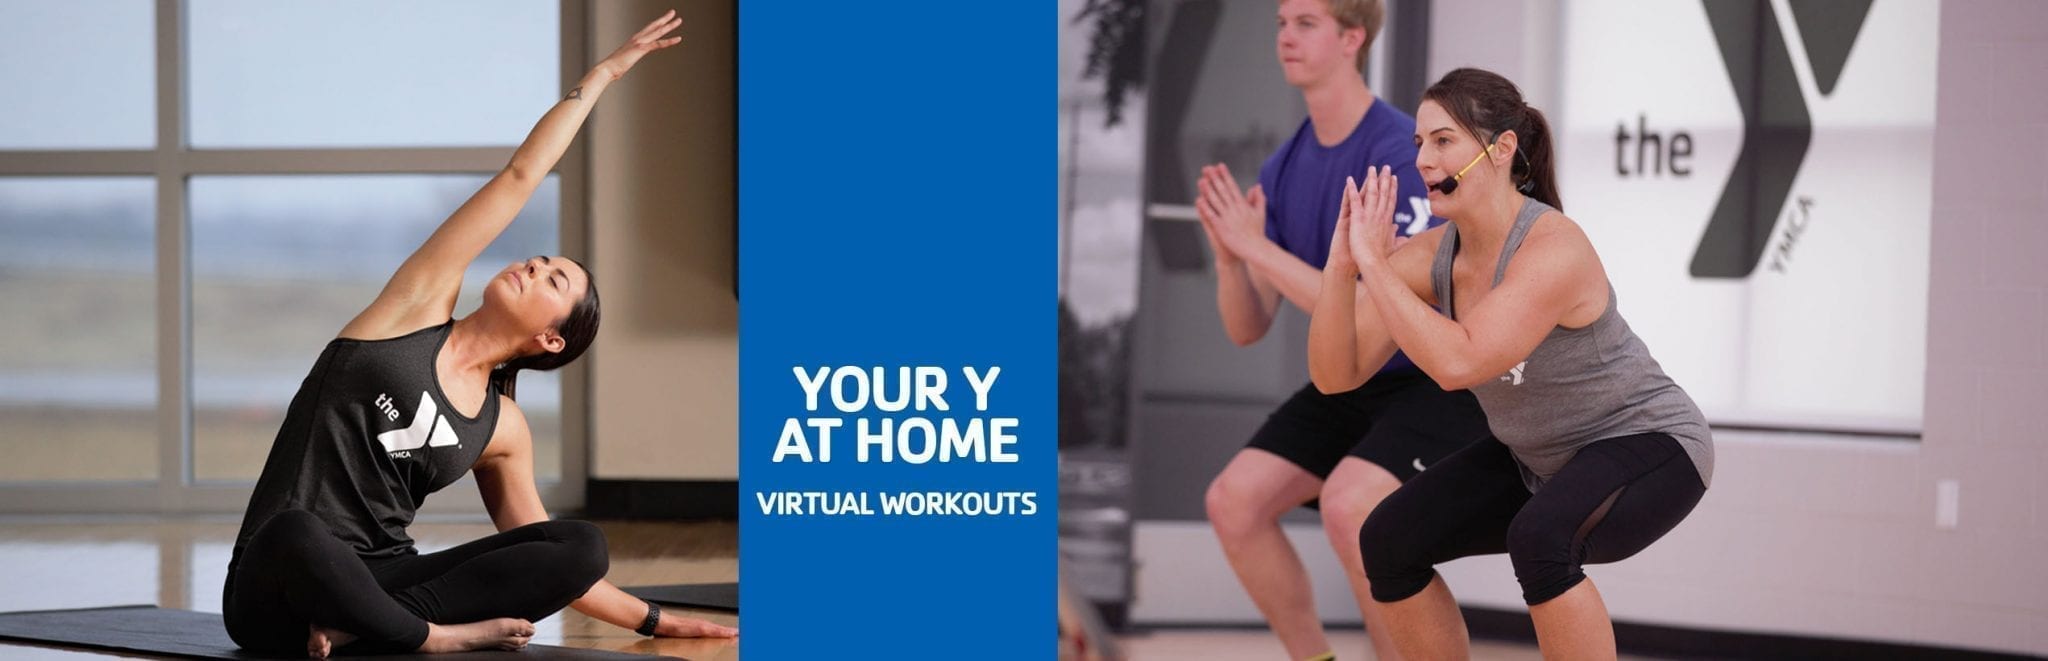 Your Y at home - virtual workouts